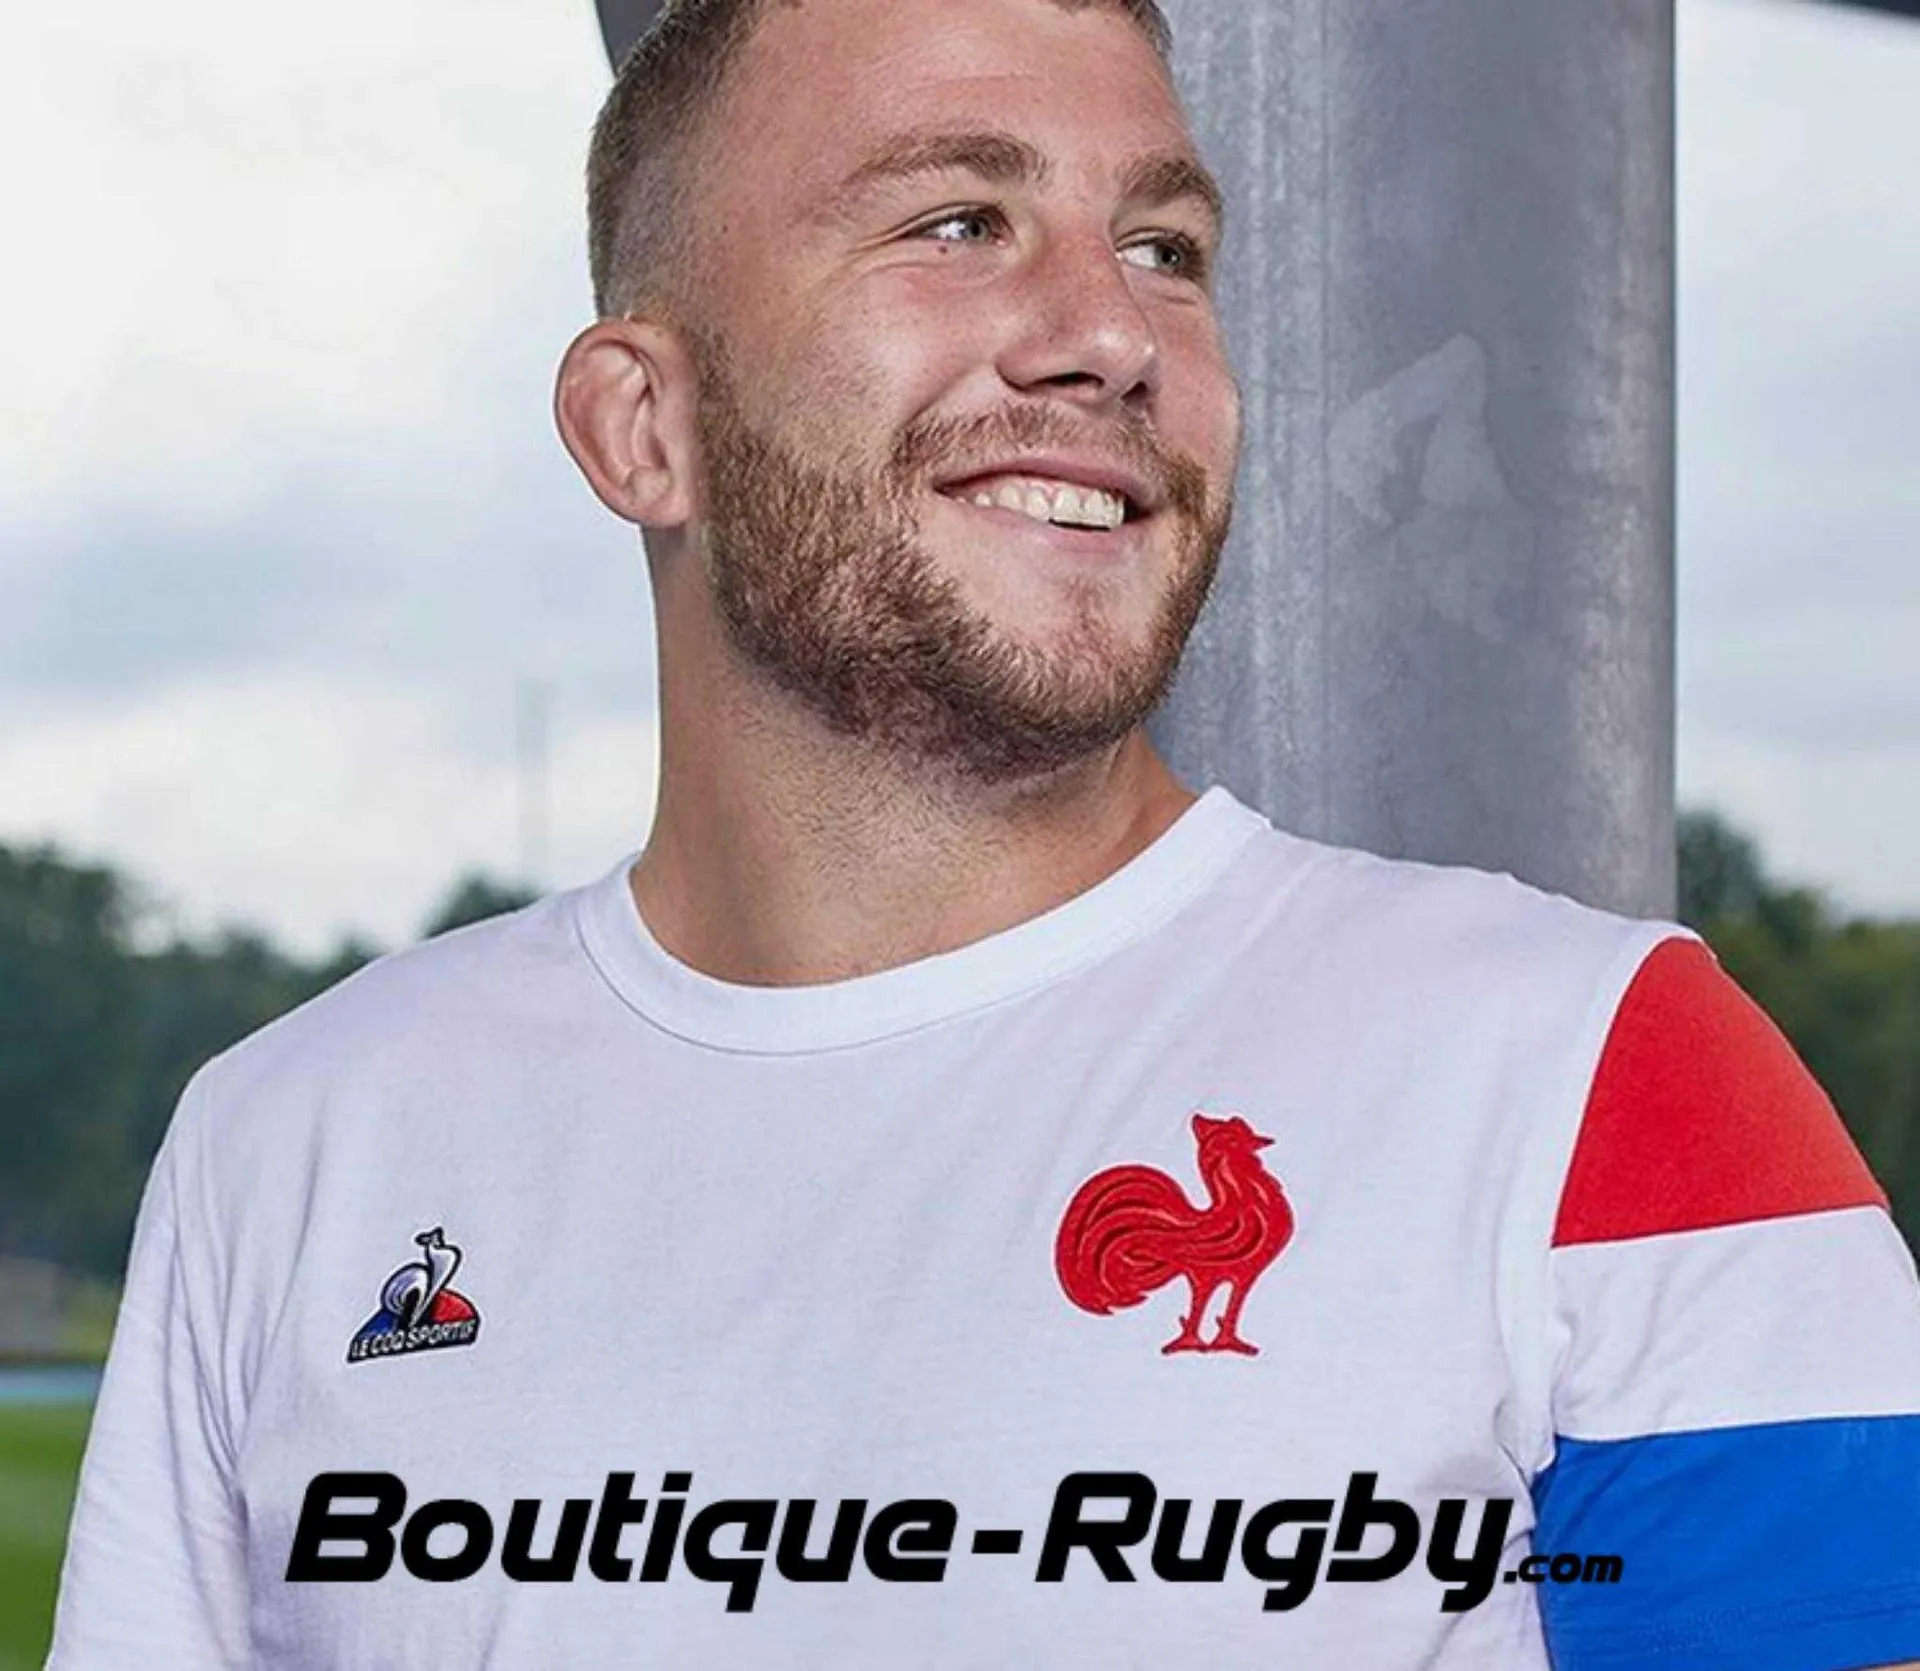 Catalogue Boutique Rugby - 1